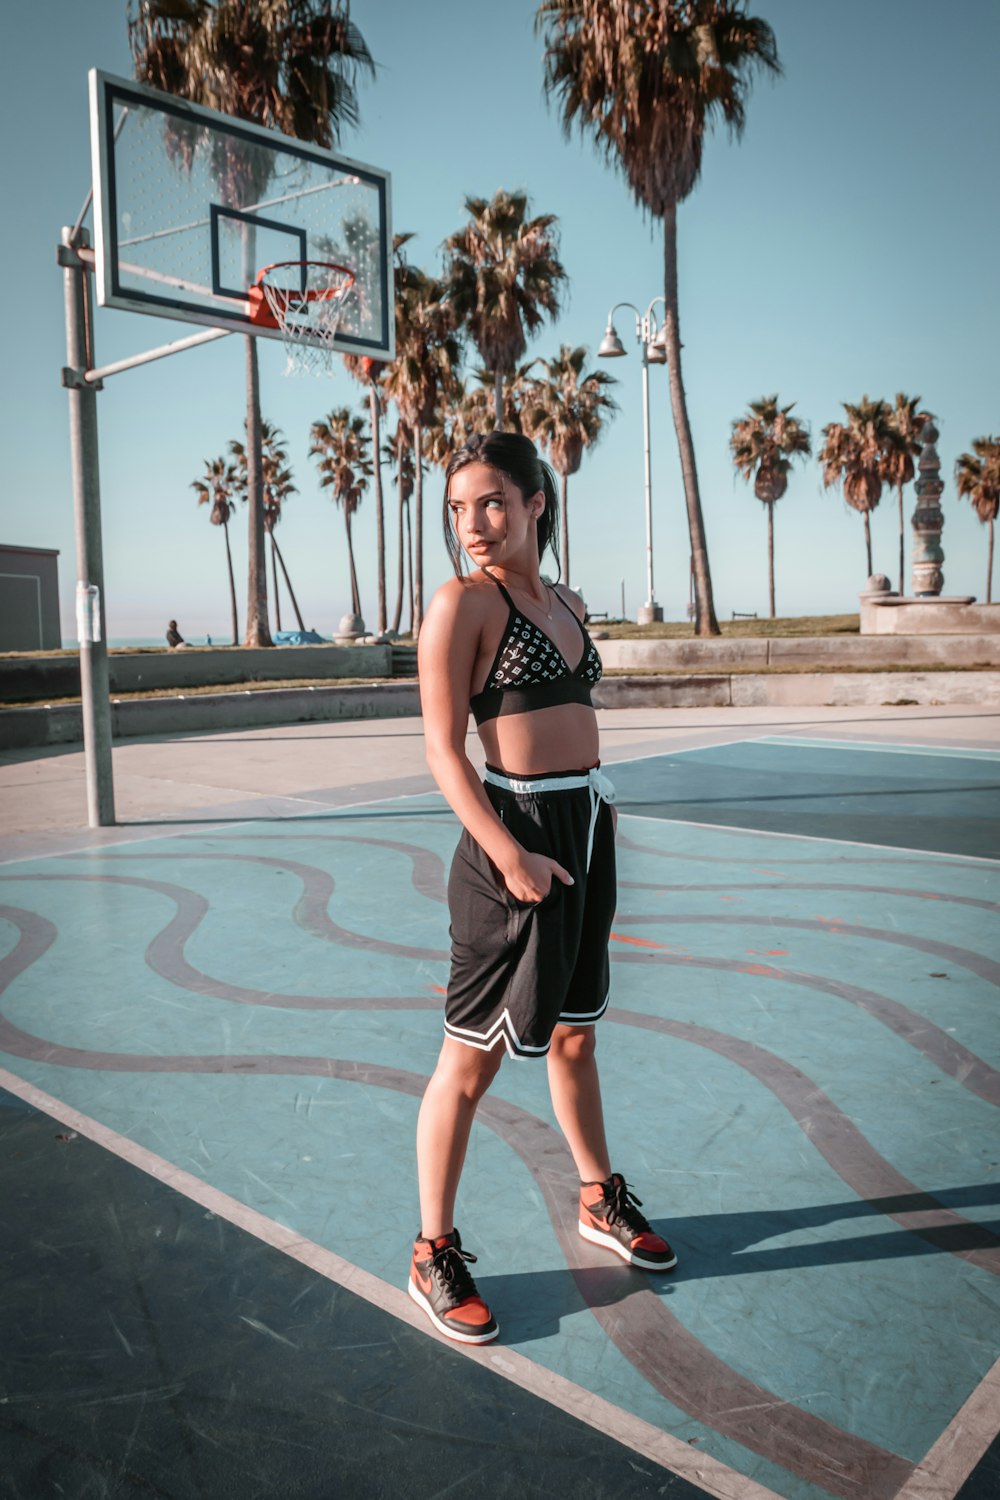 woman in black and white skirt standing on basketball court during daytime